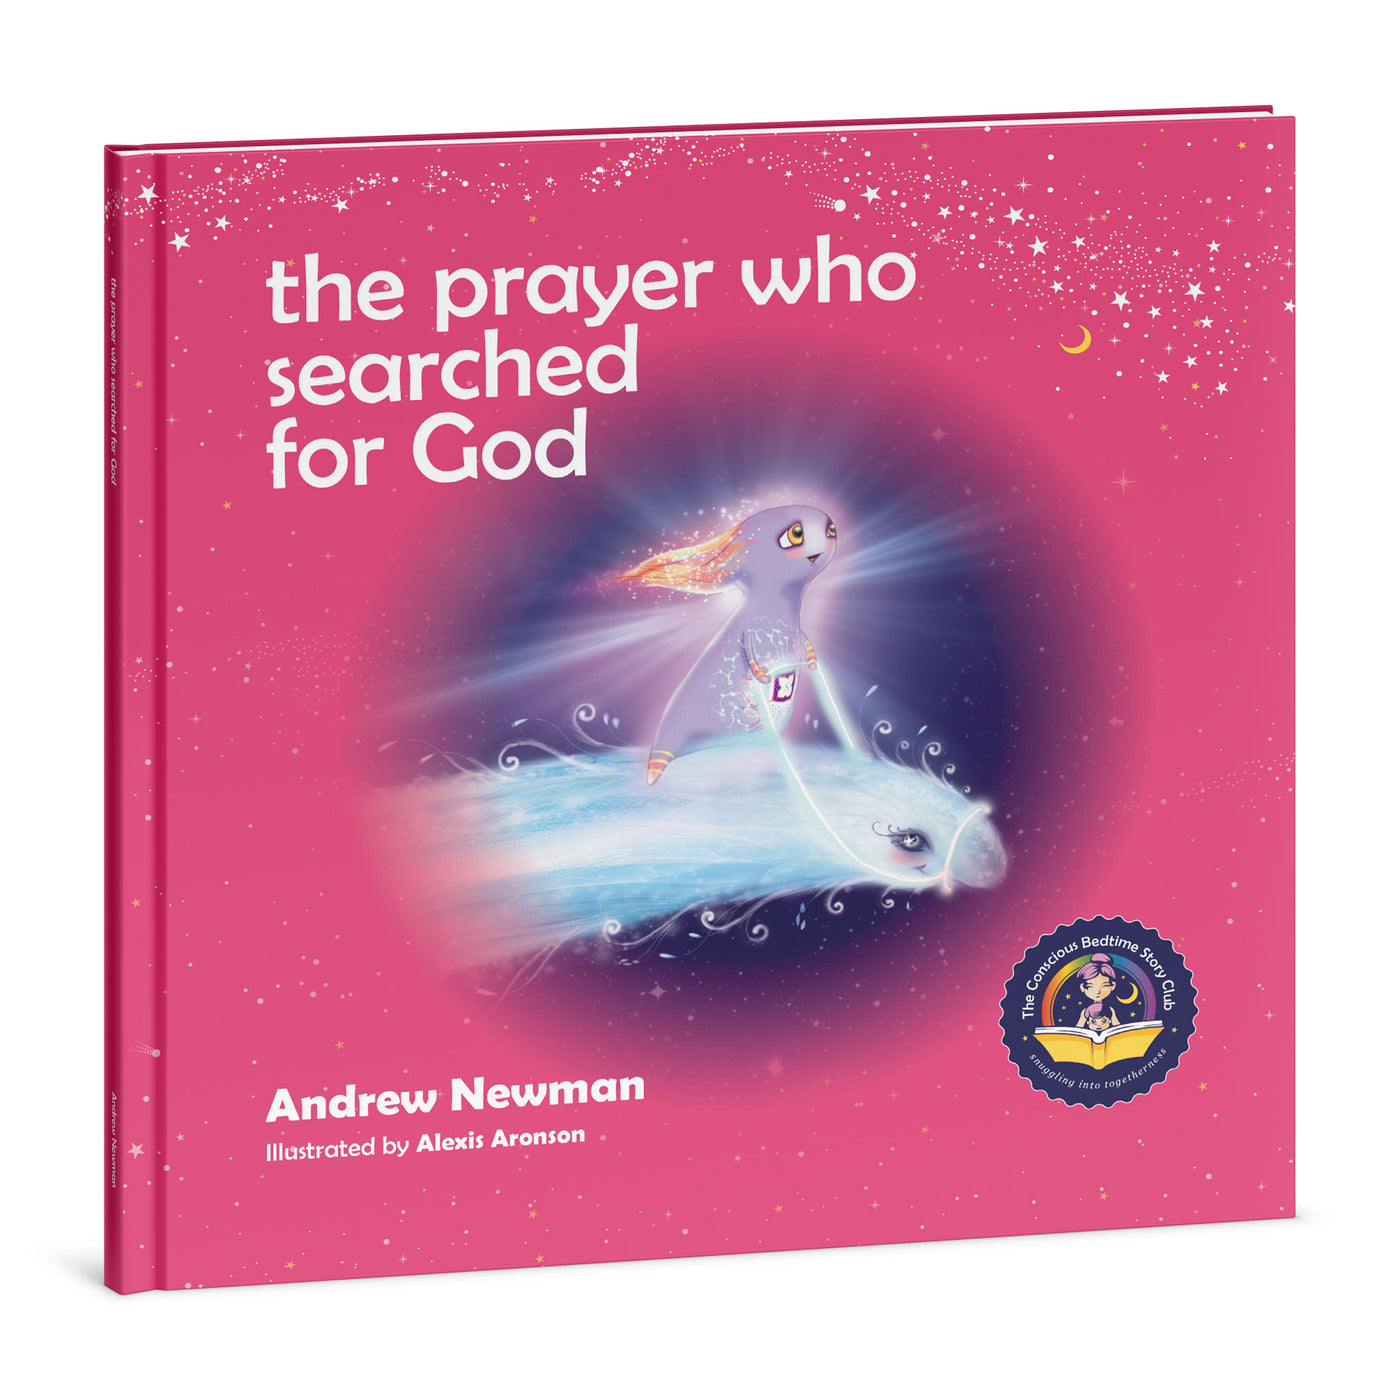 The Prayer Who Searched for God: Using prayer and breath to find God within